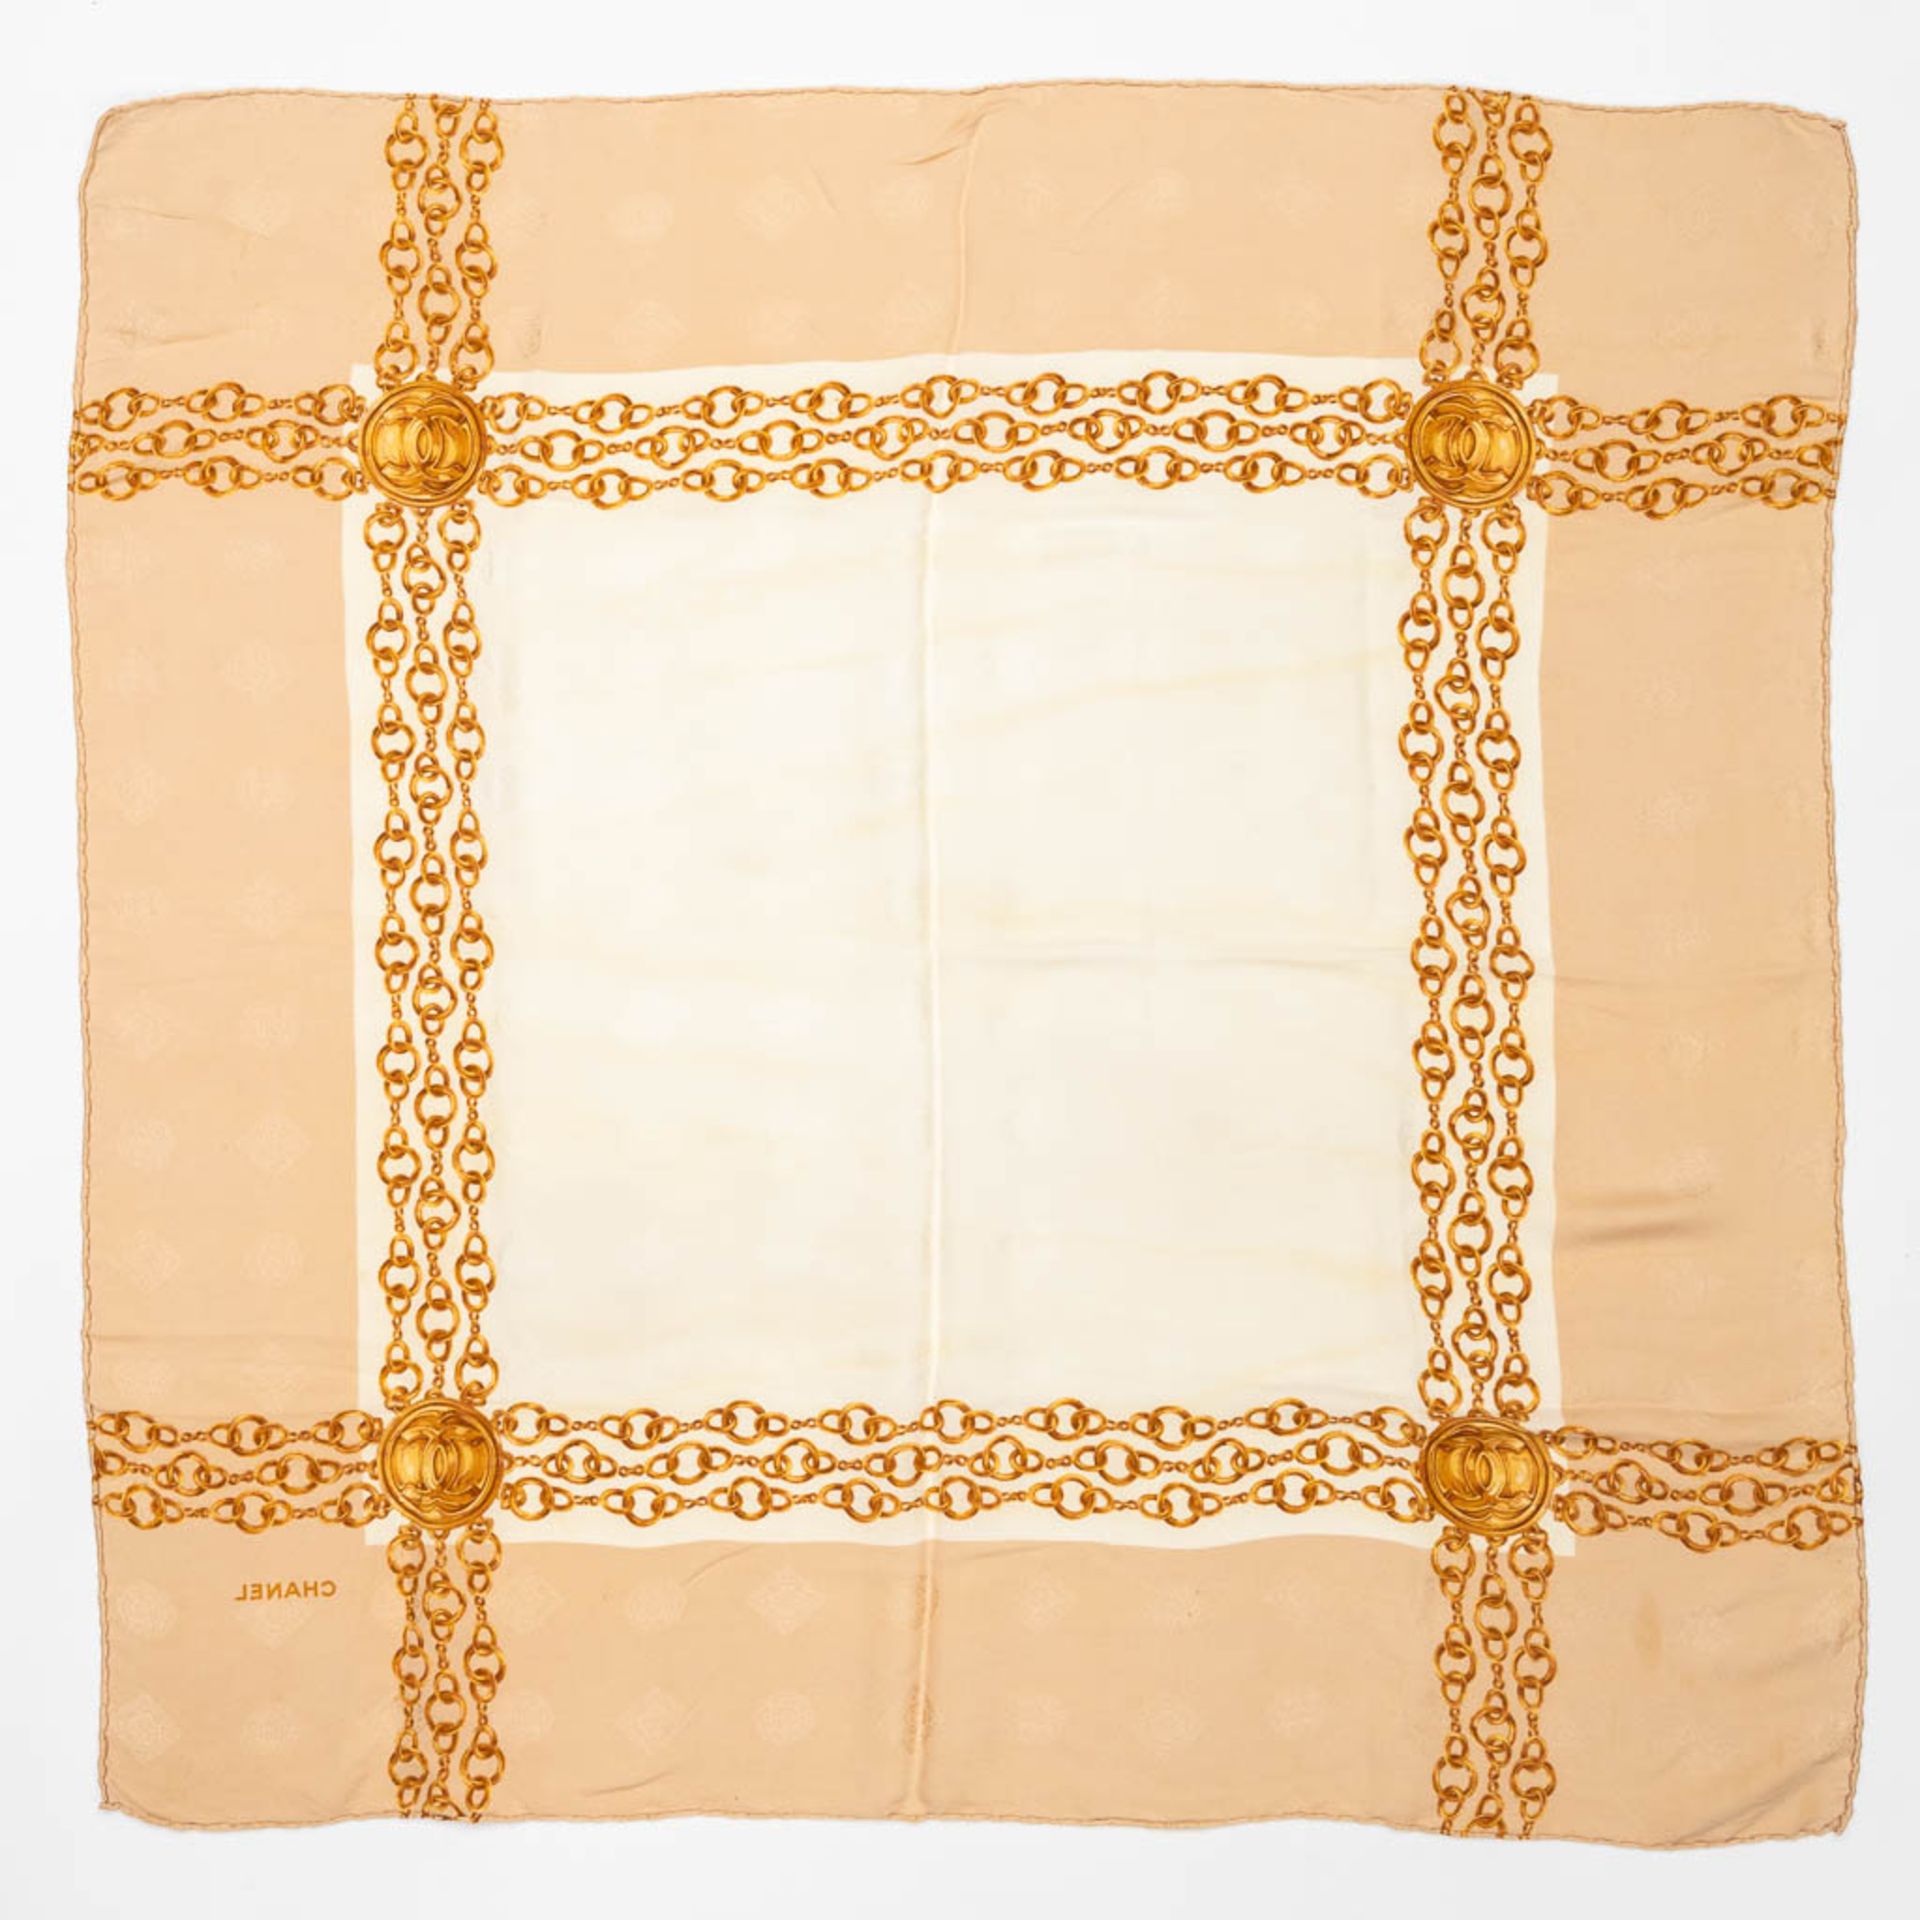 Chanel, a collection of 3 silk scarfs. (L: 86 x W: 86 cm) - Image 18 of 28